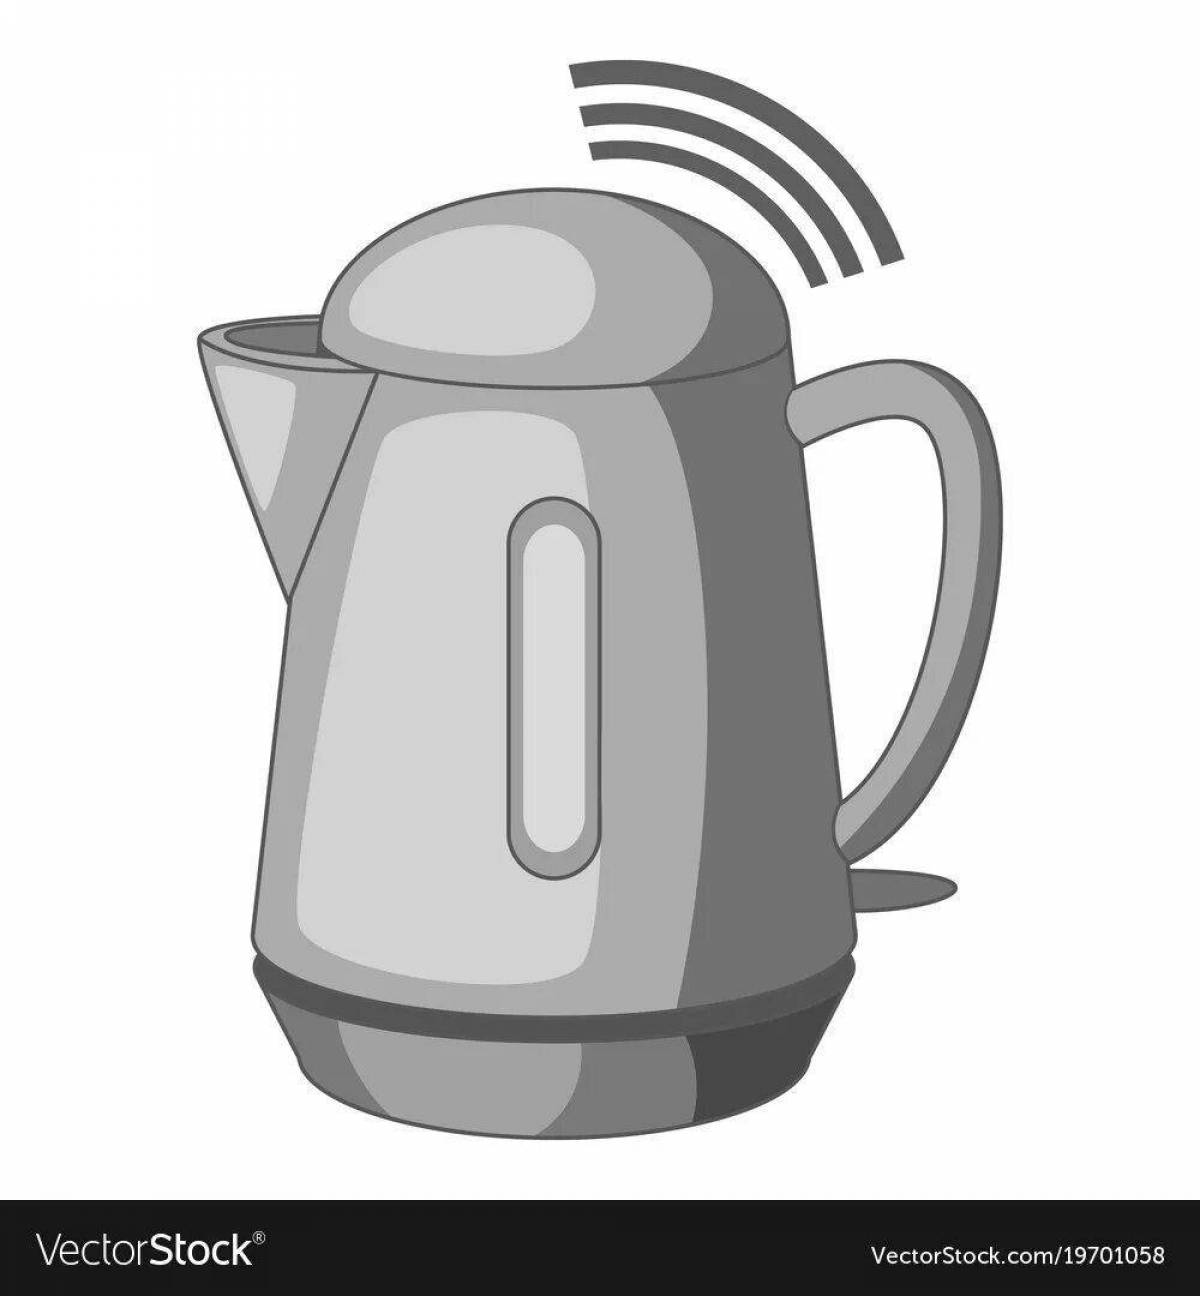 Incredible Electric Kettle Coloring Page for Toddlers